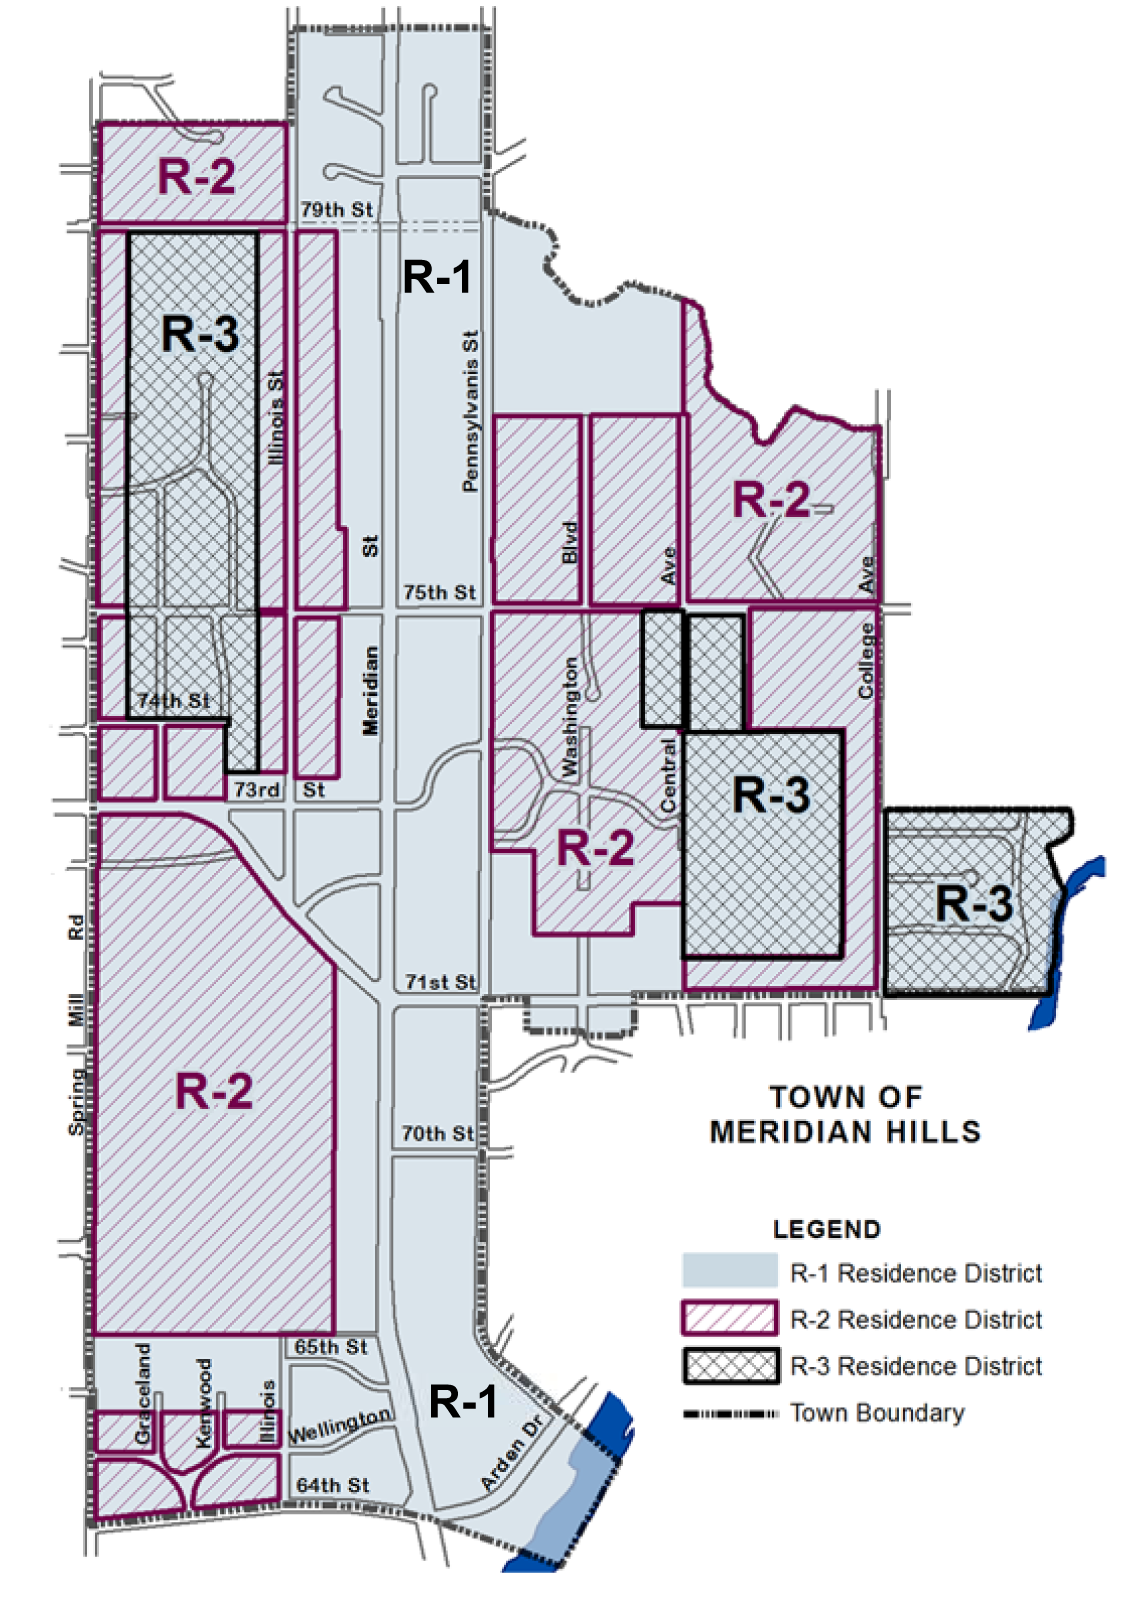 marion county zoning maps indianapolis Chapter 744 Development Standards Code Of Ordinances marion county zoning maps indianapolis